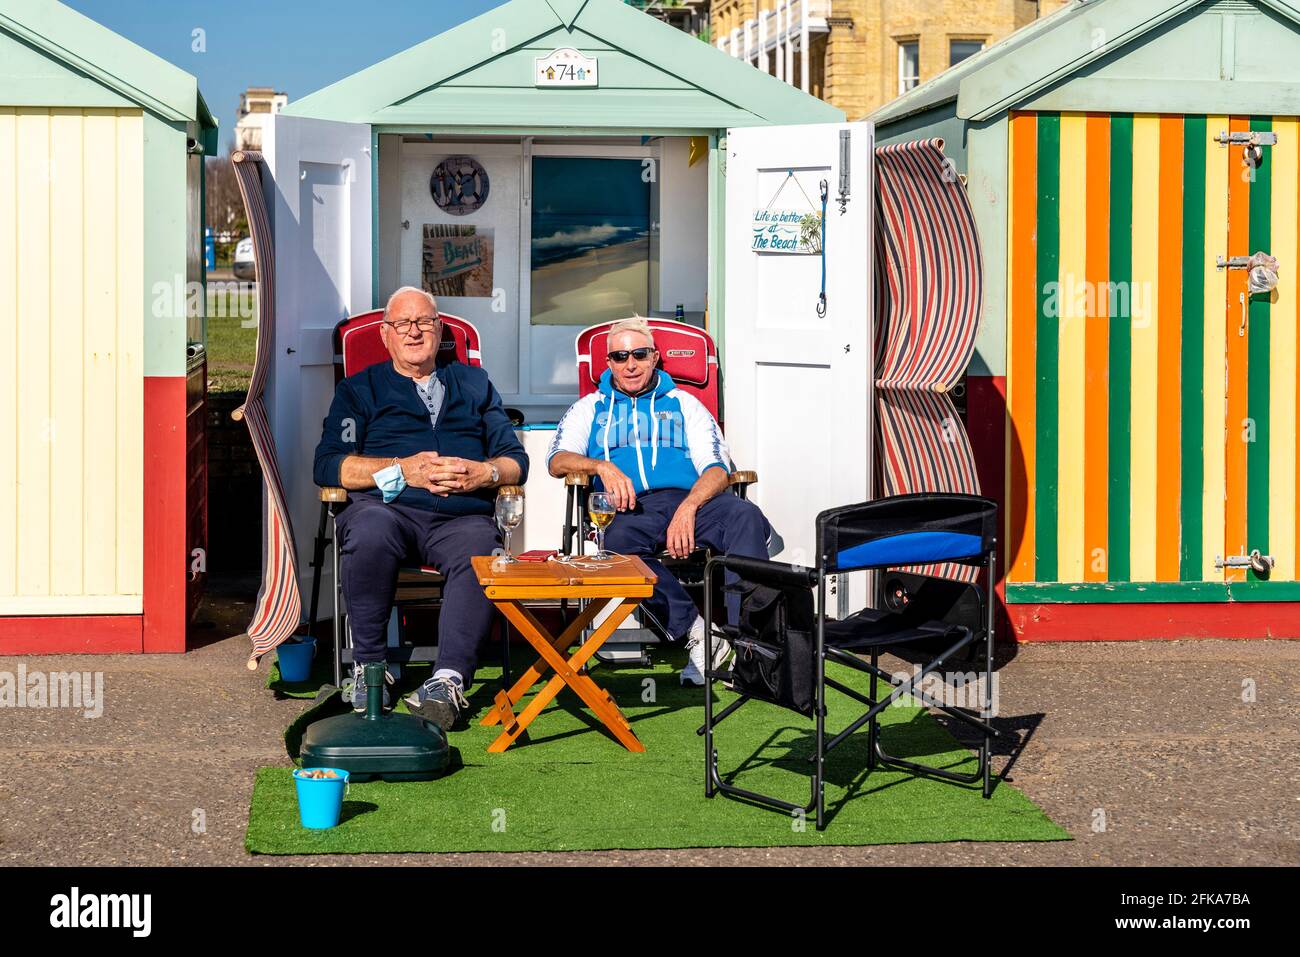 Two Local Men Enjoying The Sunshine Outside A Beach Hut On Hove Seafront, Brighton, East Sussex, UK. Stock Photo